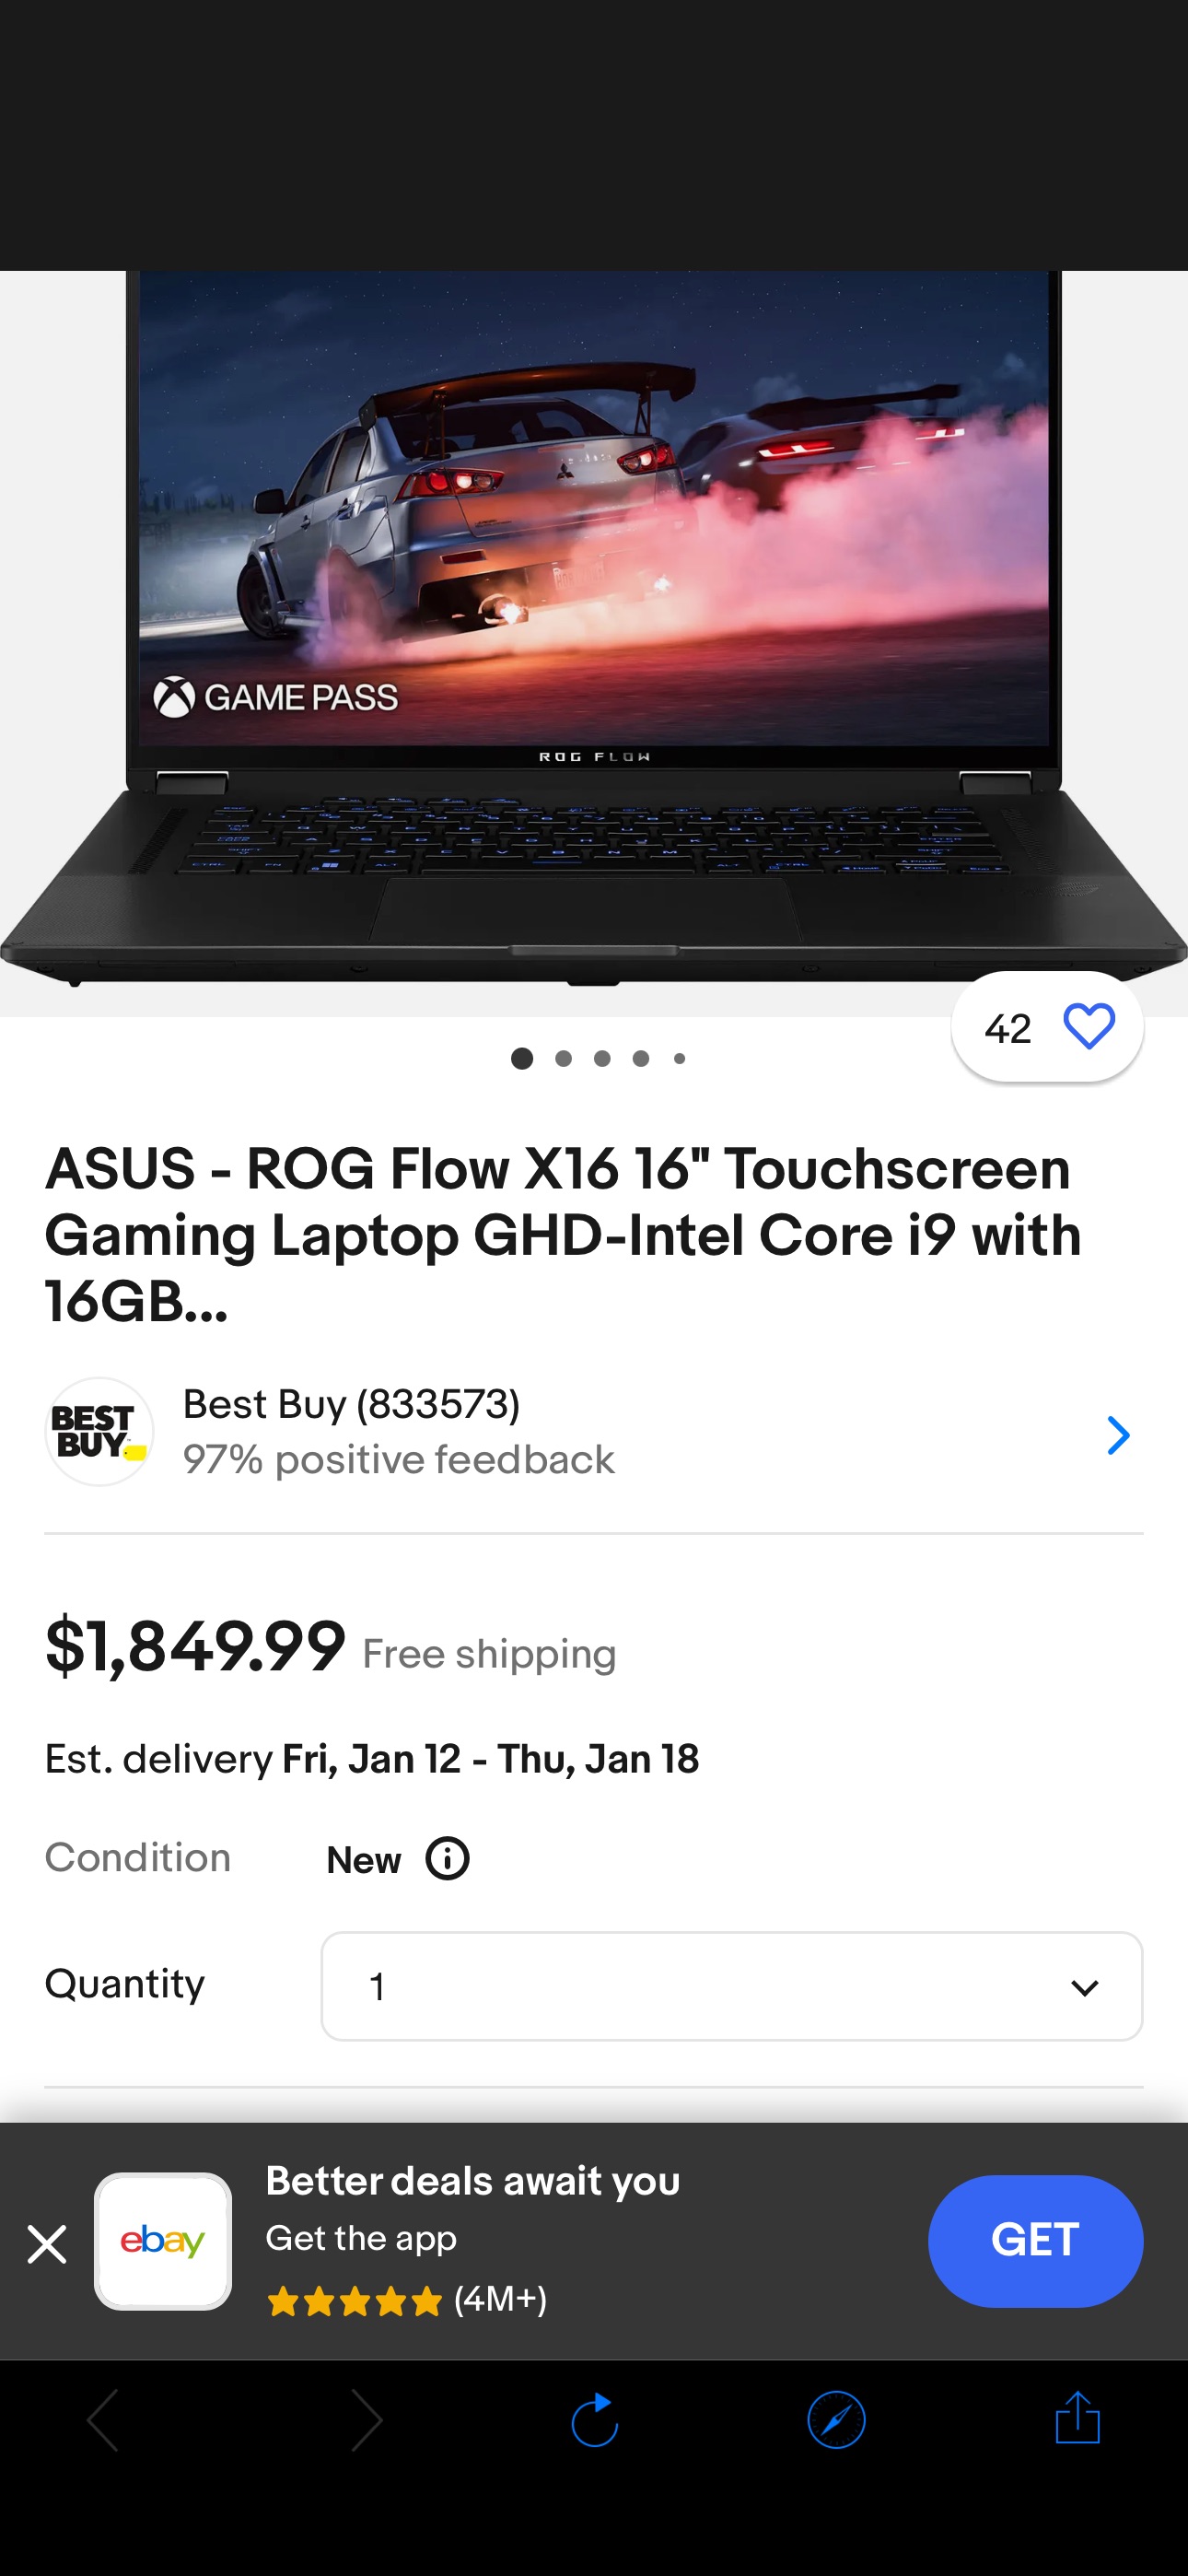 ASUS - ROG Flow X16 16" Touchscreen Gaming Laptop GHD-Intel Core i9 with 16GB... | eBay